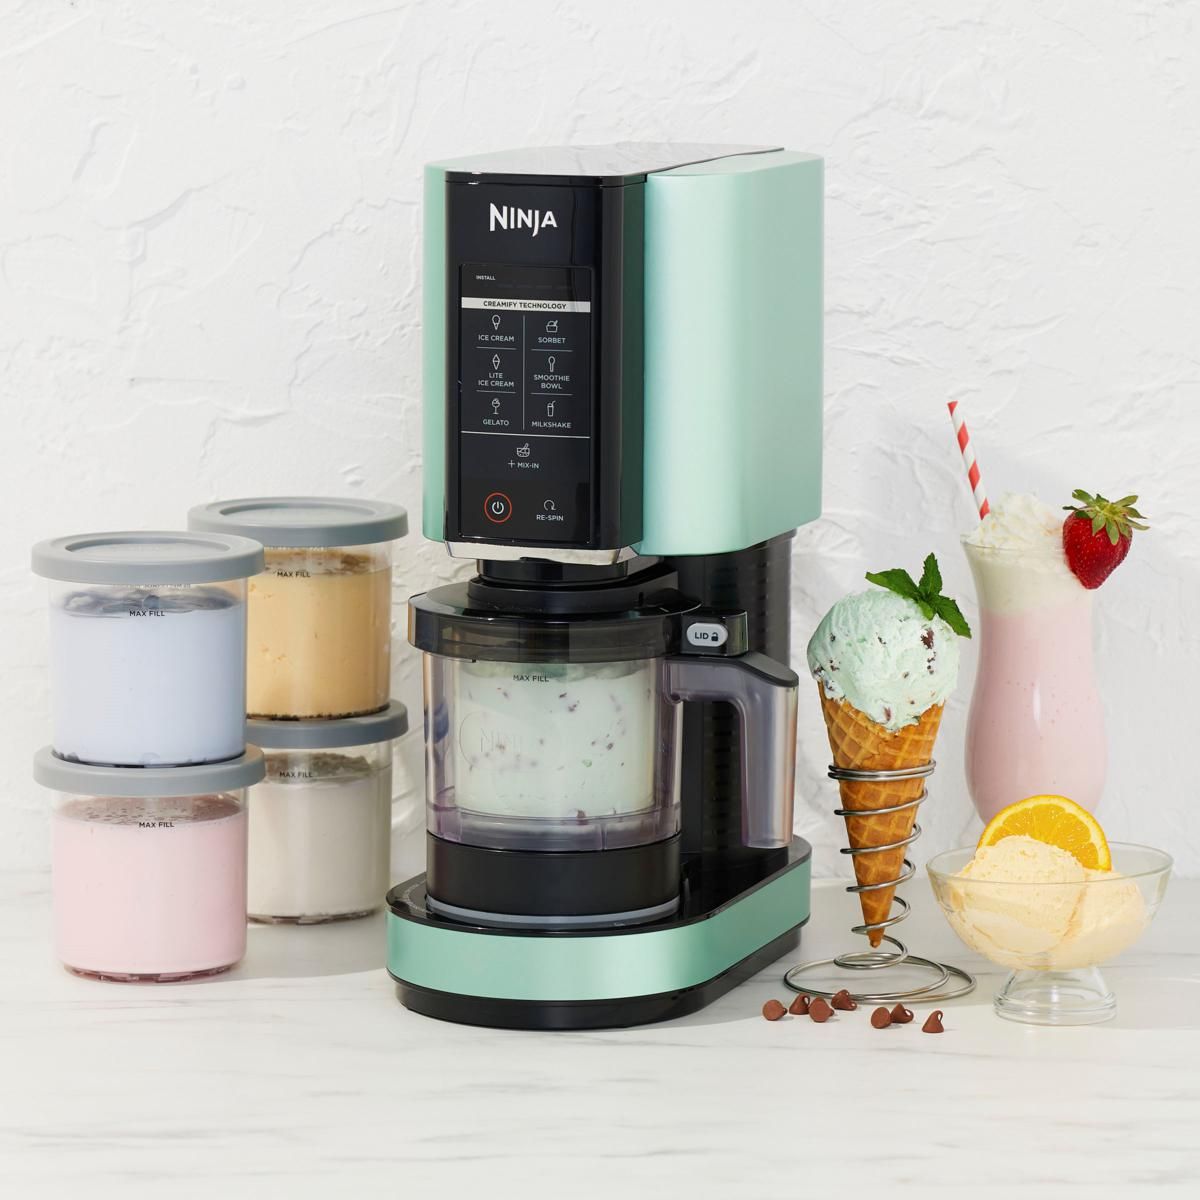 Ninja CREAMi 7-in-1 Frozen Treat Maker with Extra Pint Containers - 20367499 | HSN | HSN